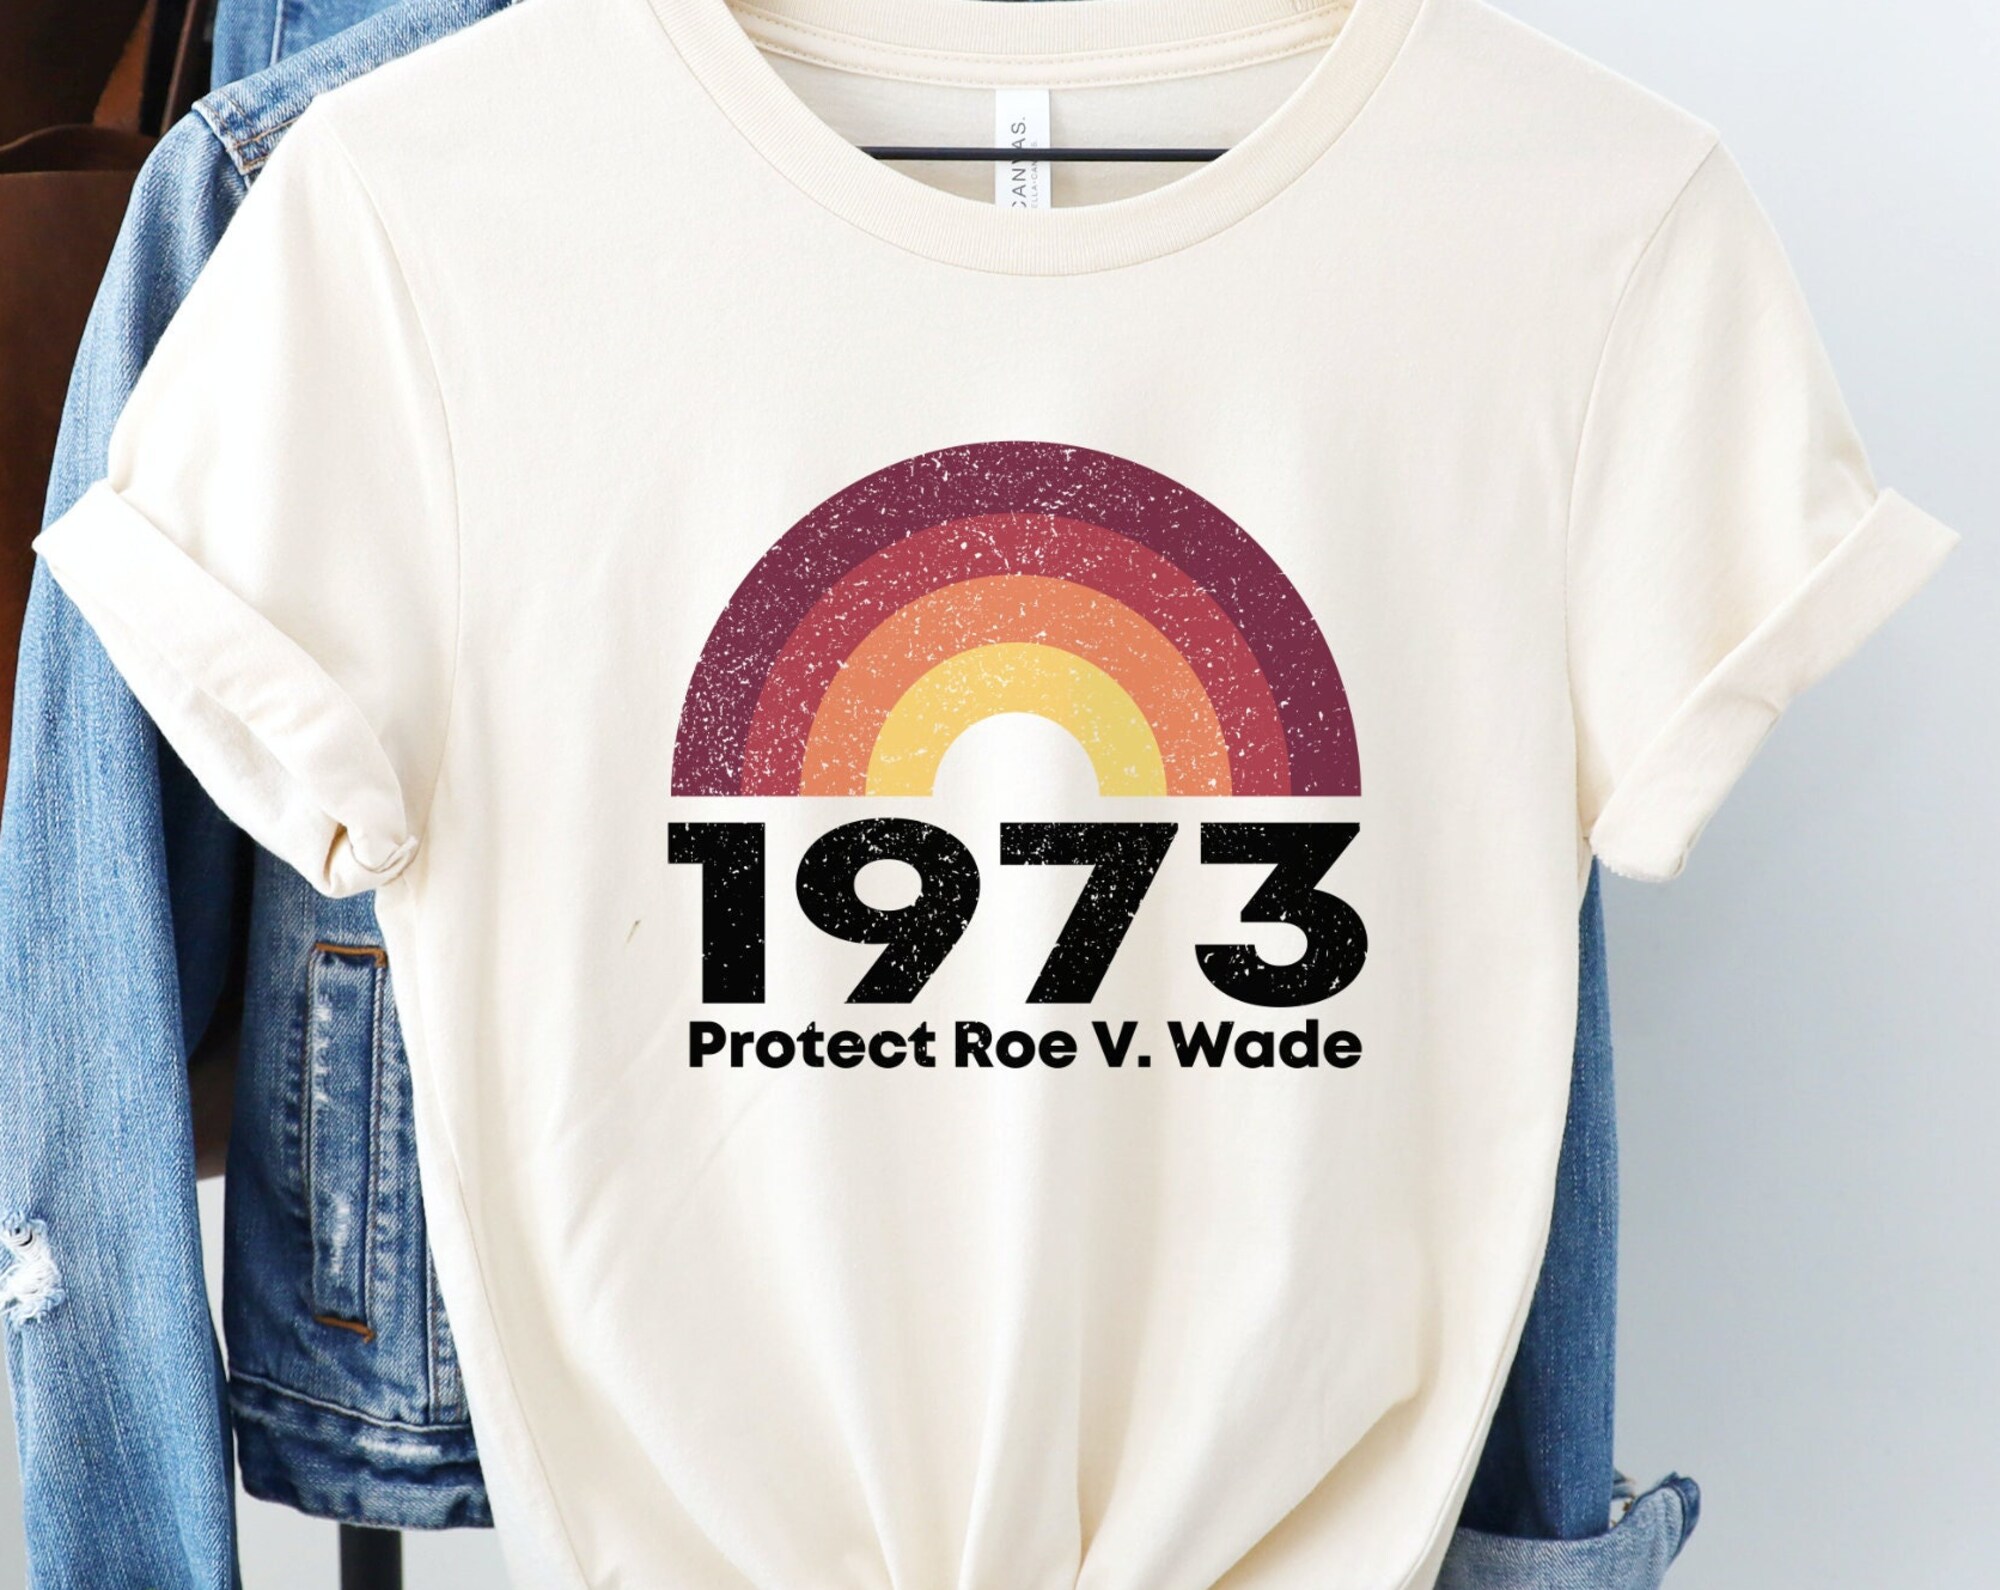 Discover Protect Roe V. Wade Shirt, Pro Choice T-Shirt, 1973 T Shirt, Feminist Tee, Gift for Activists, My Body My Choice Top, Reproductive Rights